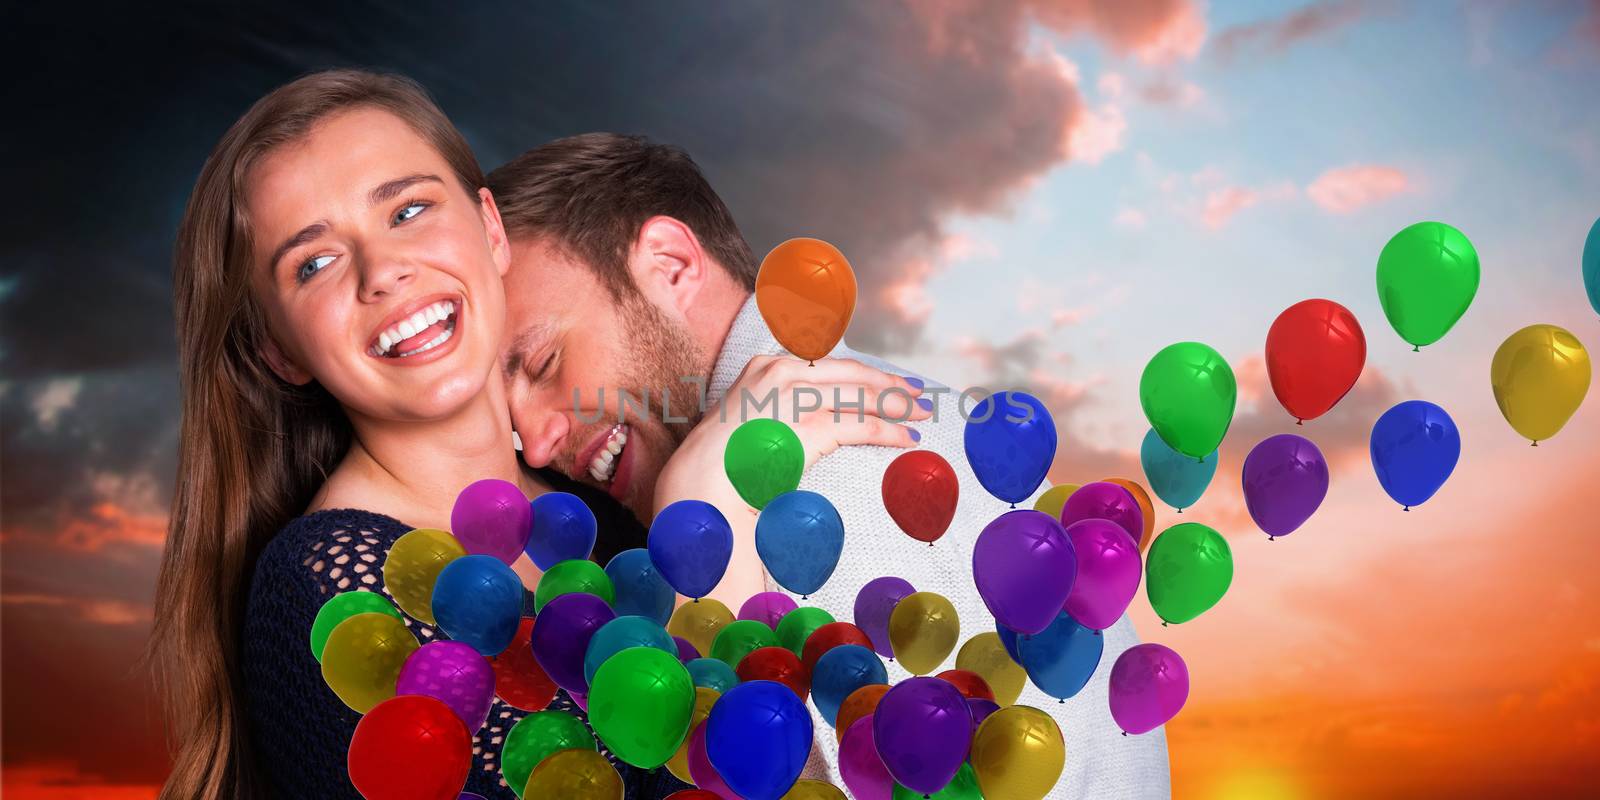 Close up of happy young couple against orange and blue sky with clouds